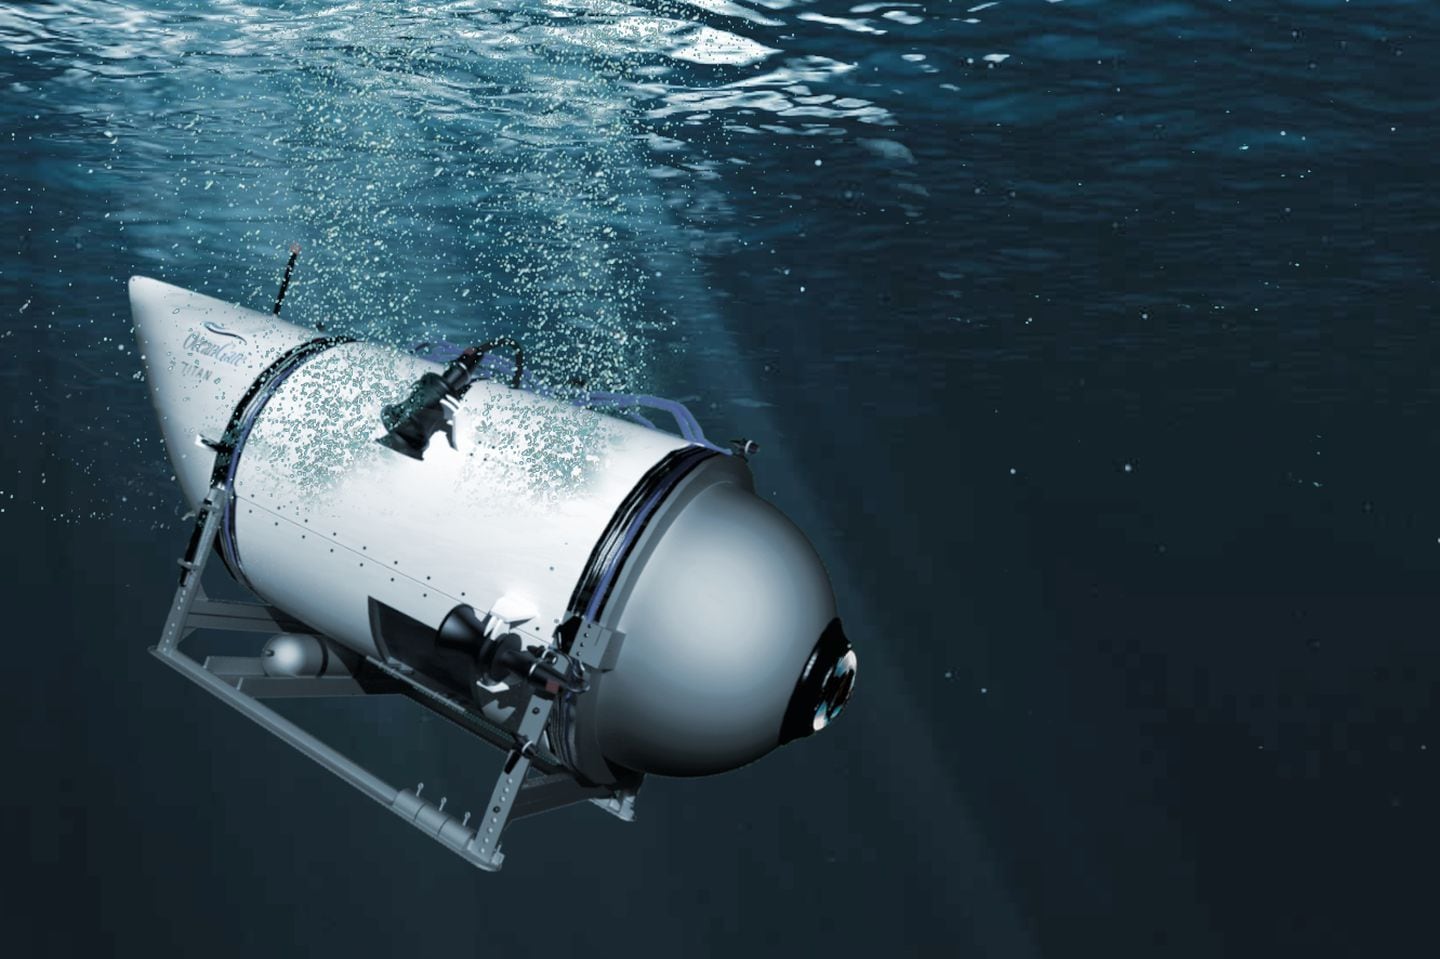 A 3D model of the Titan submersible.